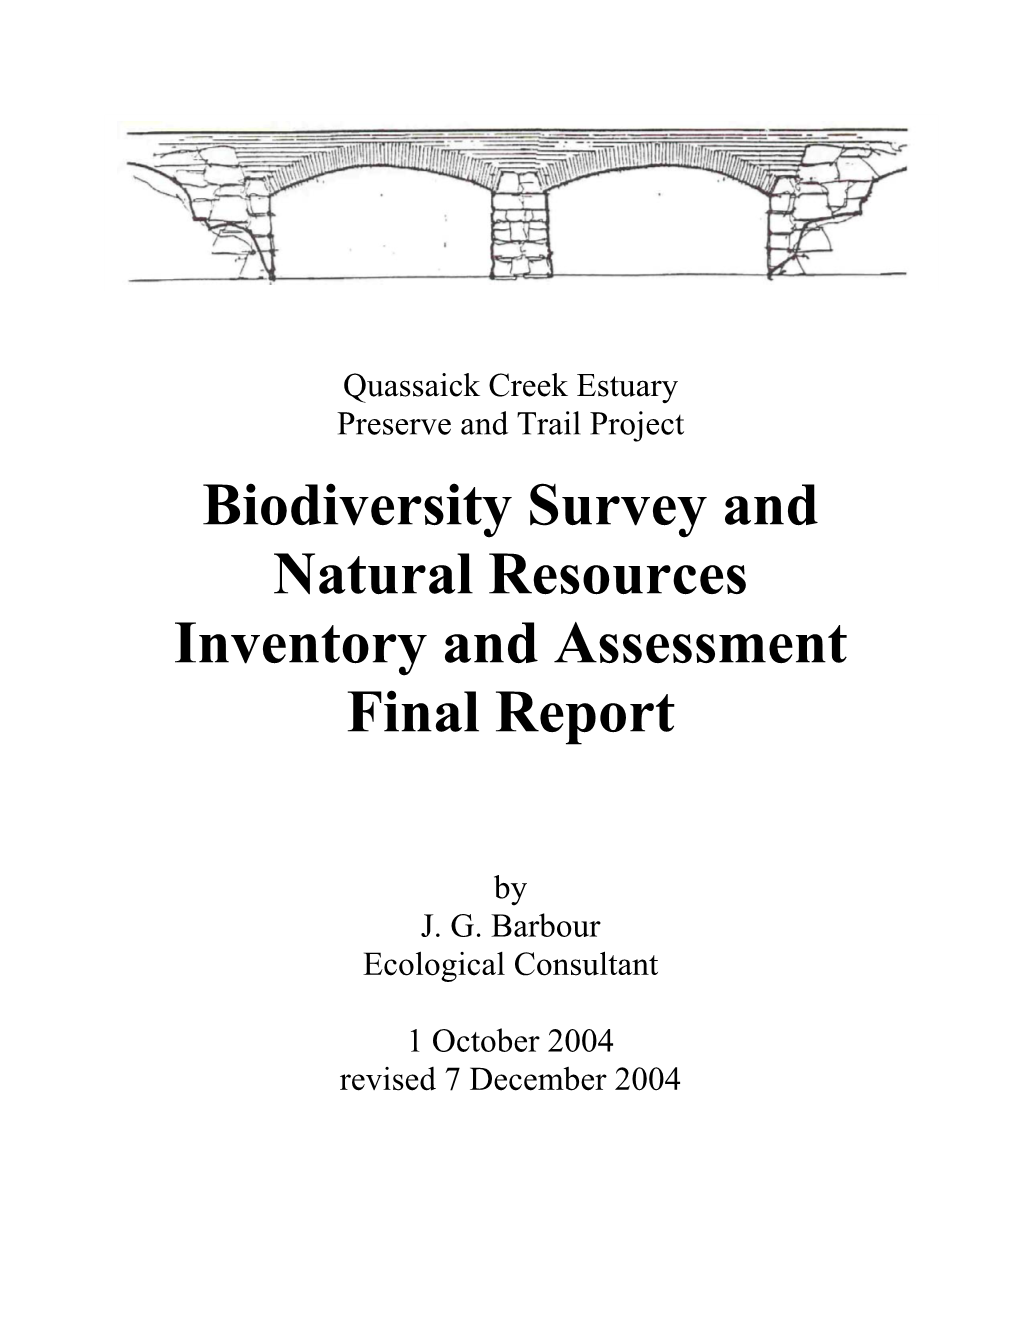 Biodiversity Survey and Natural Resources Inventory and Assessment Final Report